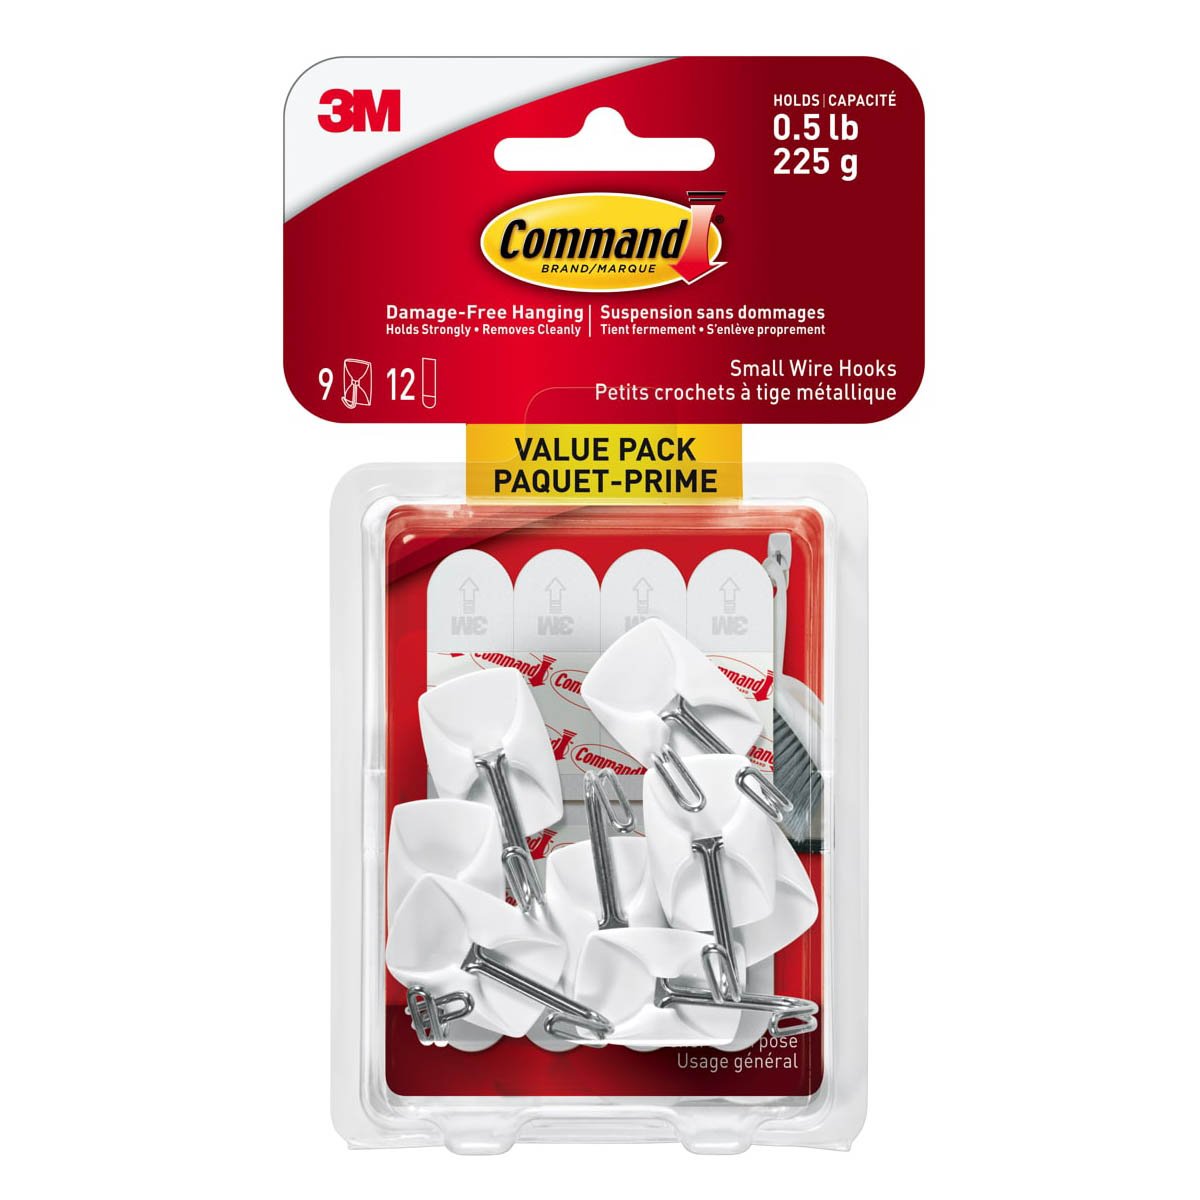 3M Command Small Wire Hooks Value Pack 9 Hooks/12 Strips/0.23 Kg